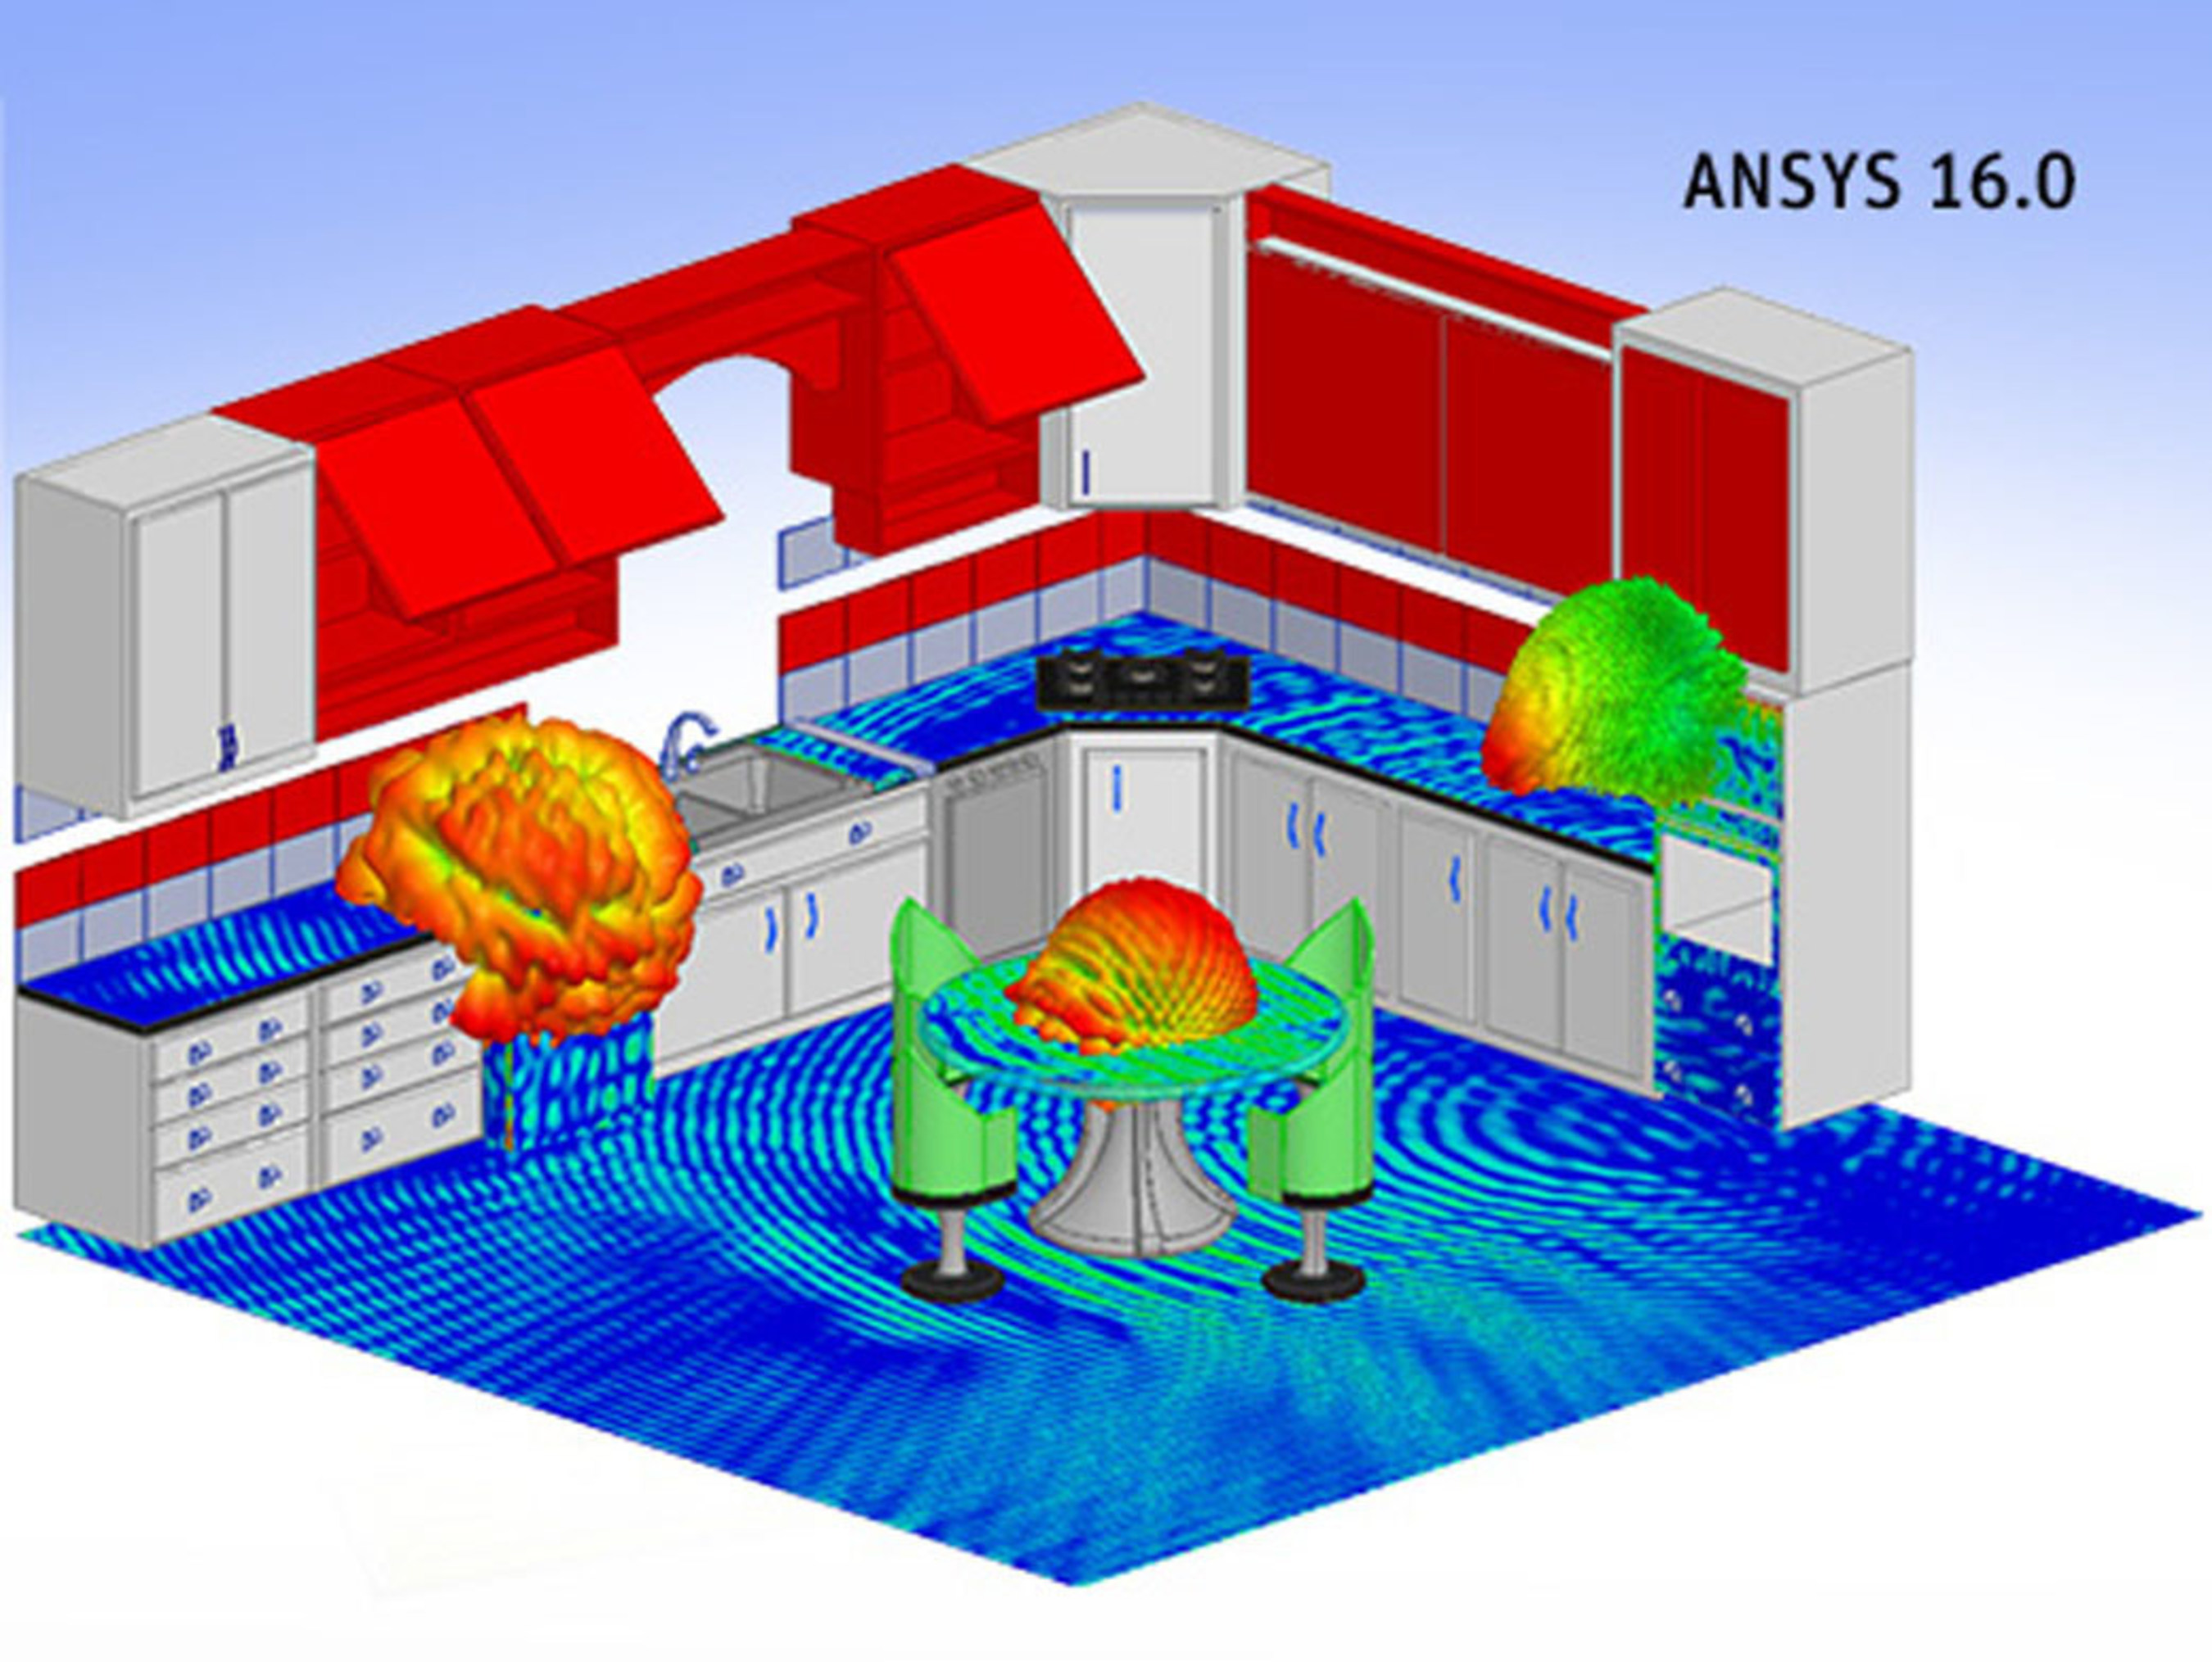 ANSYS 16.0 includes a variety of new functionality - including capabilities to verify electronics reliability and performance throughout the design process and complex electronics industry supply chains, which in turn helps to facilitate the Internet of Things